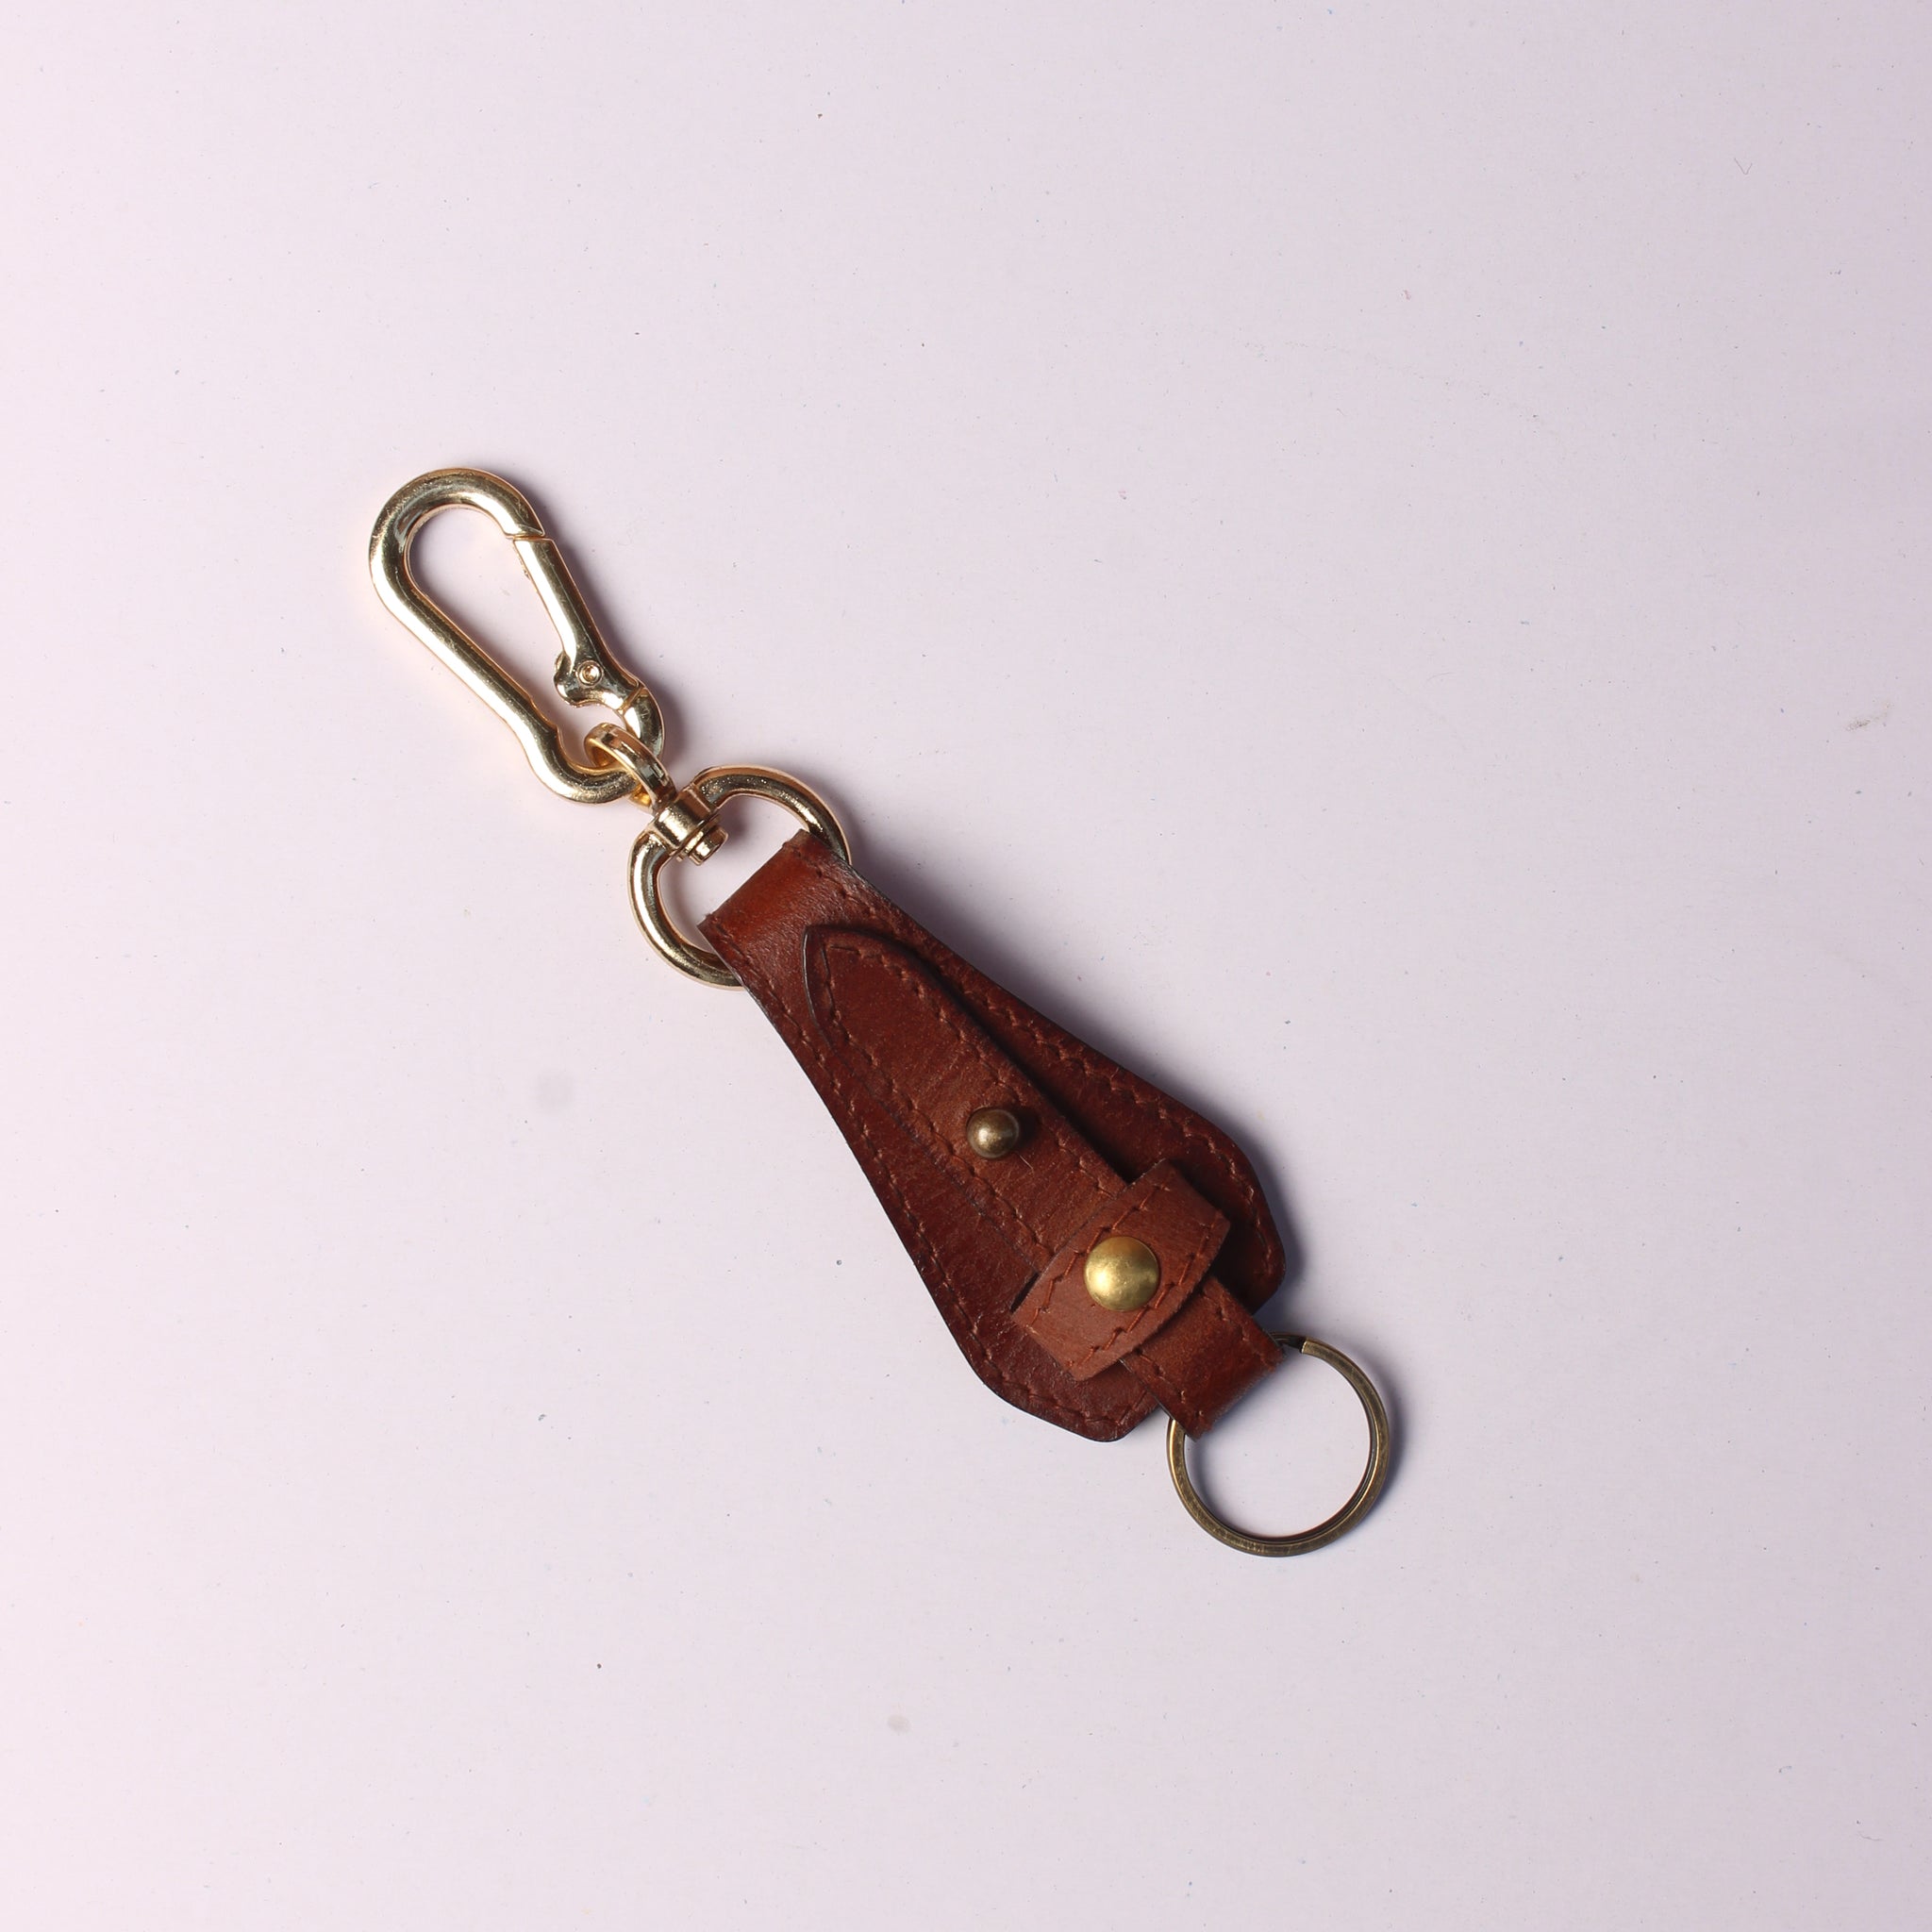 Vintage-Inspired Leather Keyring: Time-tested Style and Function